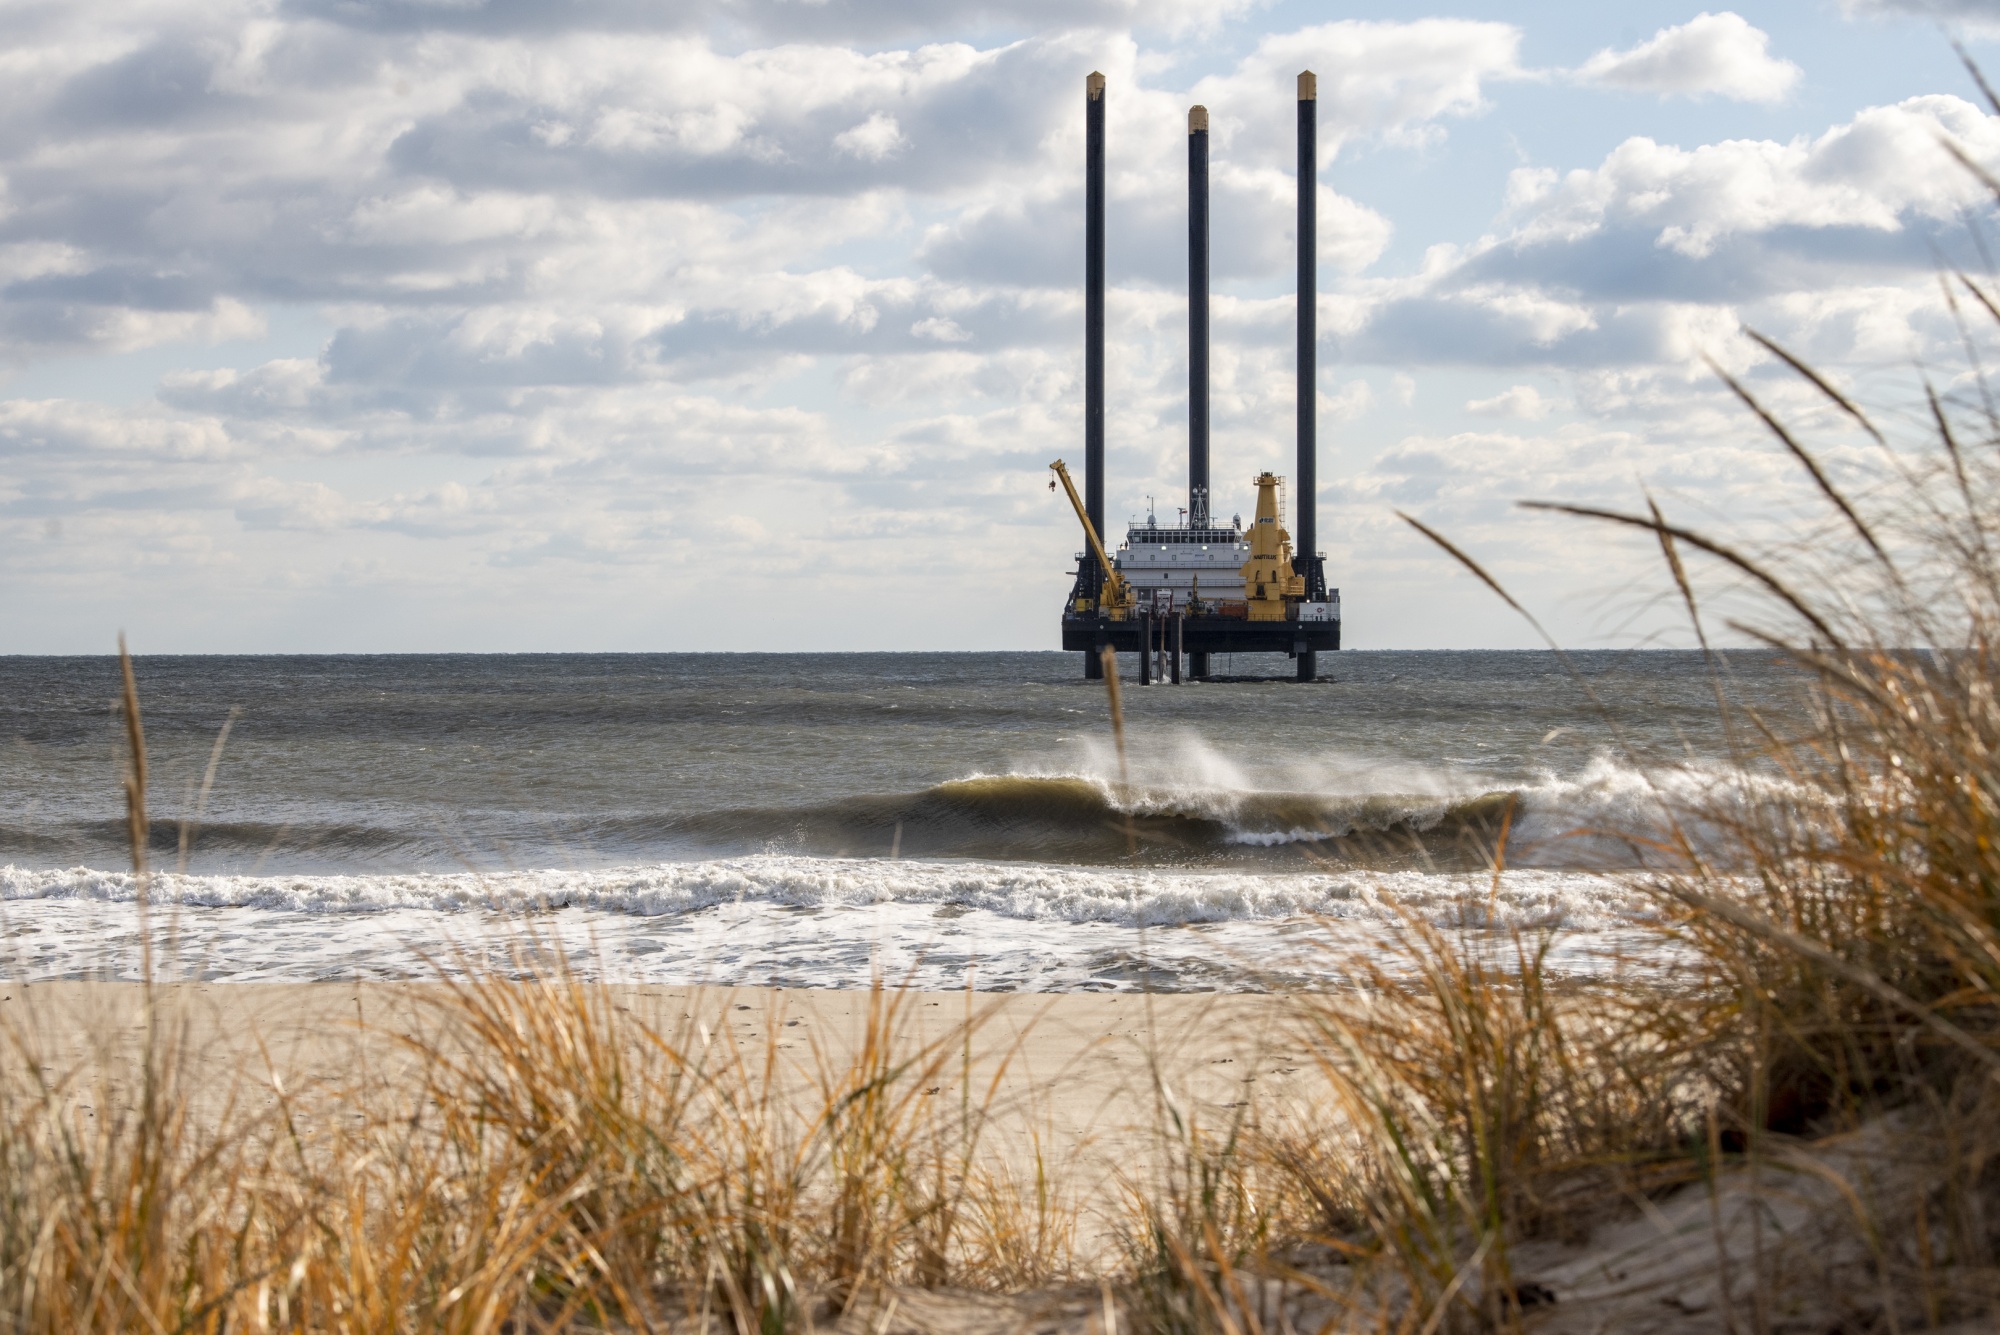 A lift boat used for South Fork Wind farm construction near Wainscott, New York.